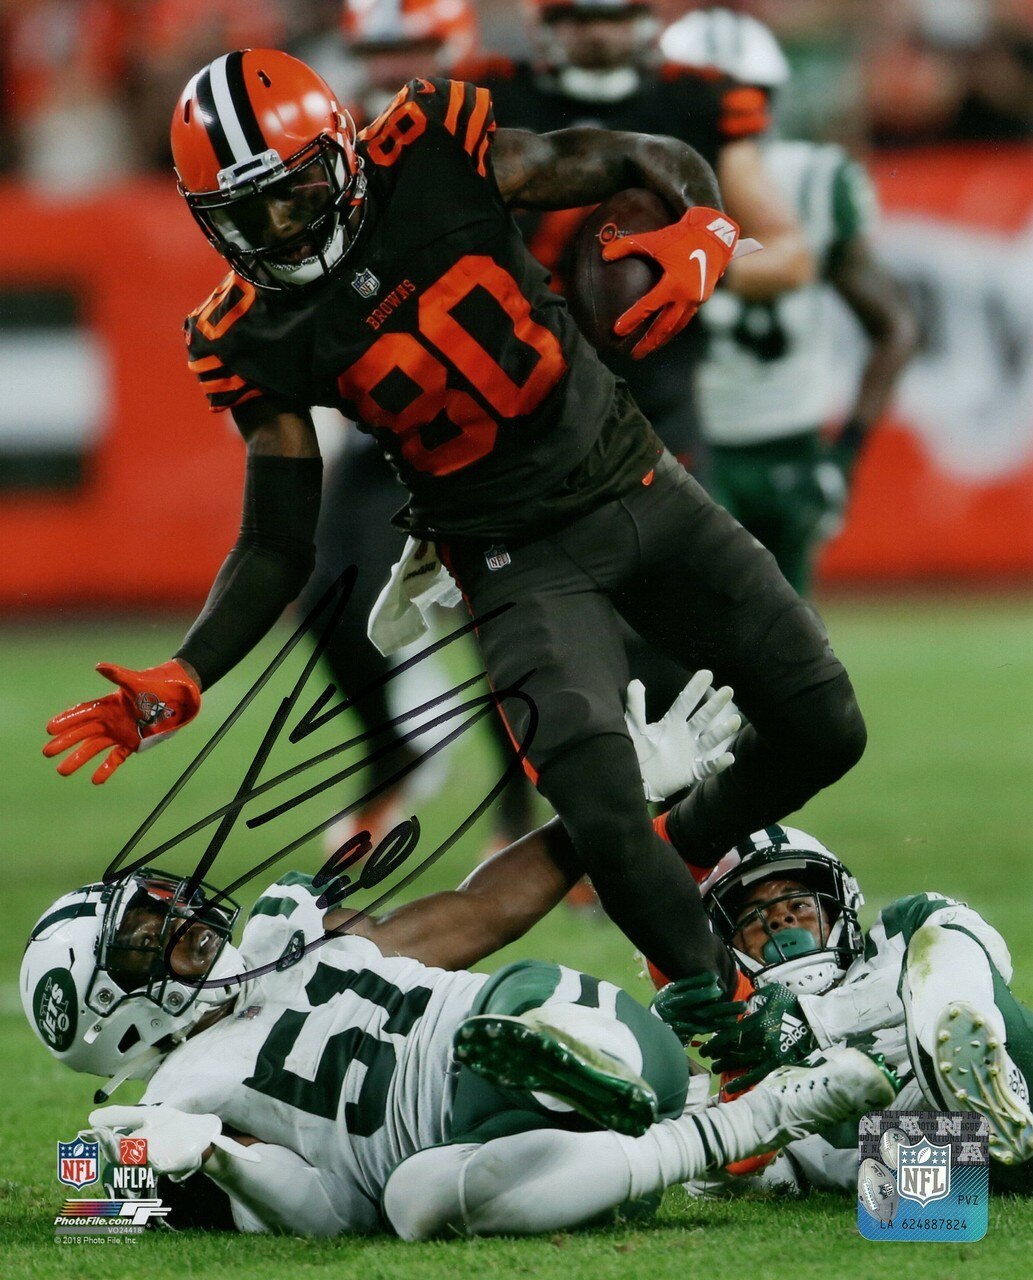 Jarvis Landry Cleveland Browns 8-1 Autographed Photo - Cleveland Browns Vs Jets 2018 , HD Wallpaper & Backgrounds